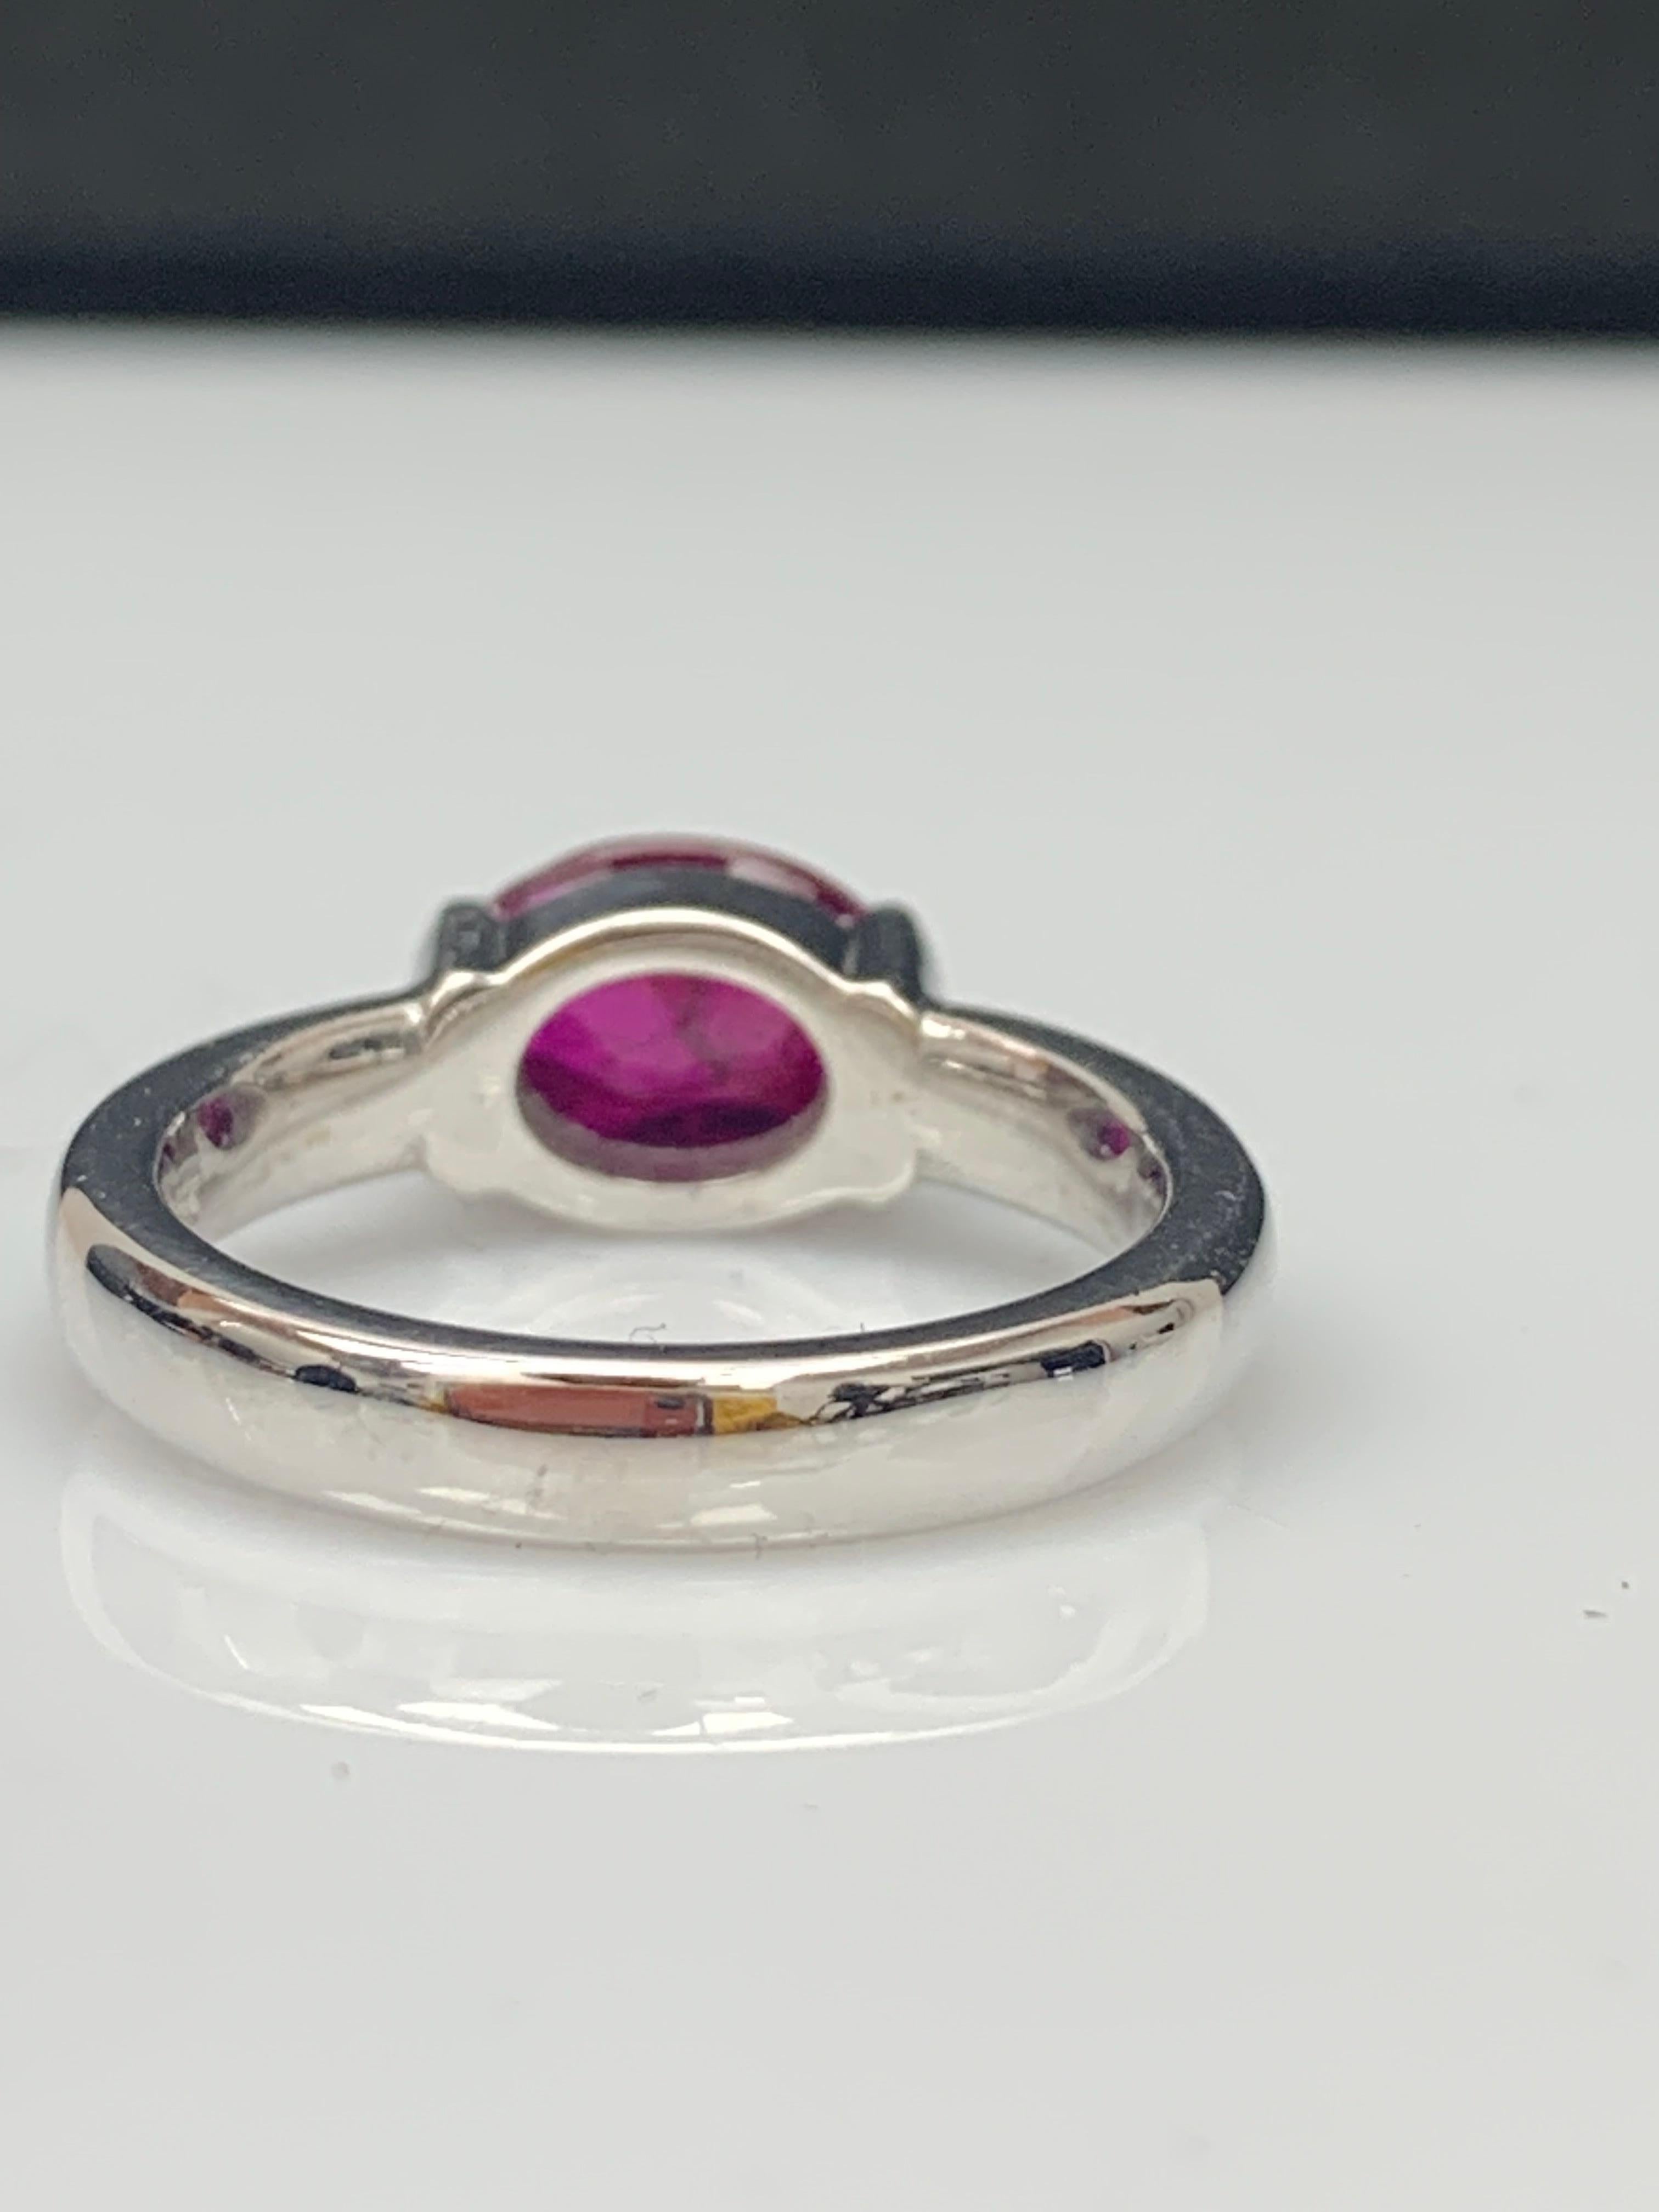 1.37 Carat Oval Cut Ruby Band Ring in 14K White Gold For Sale 2